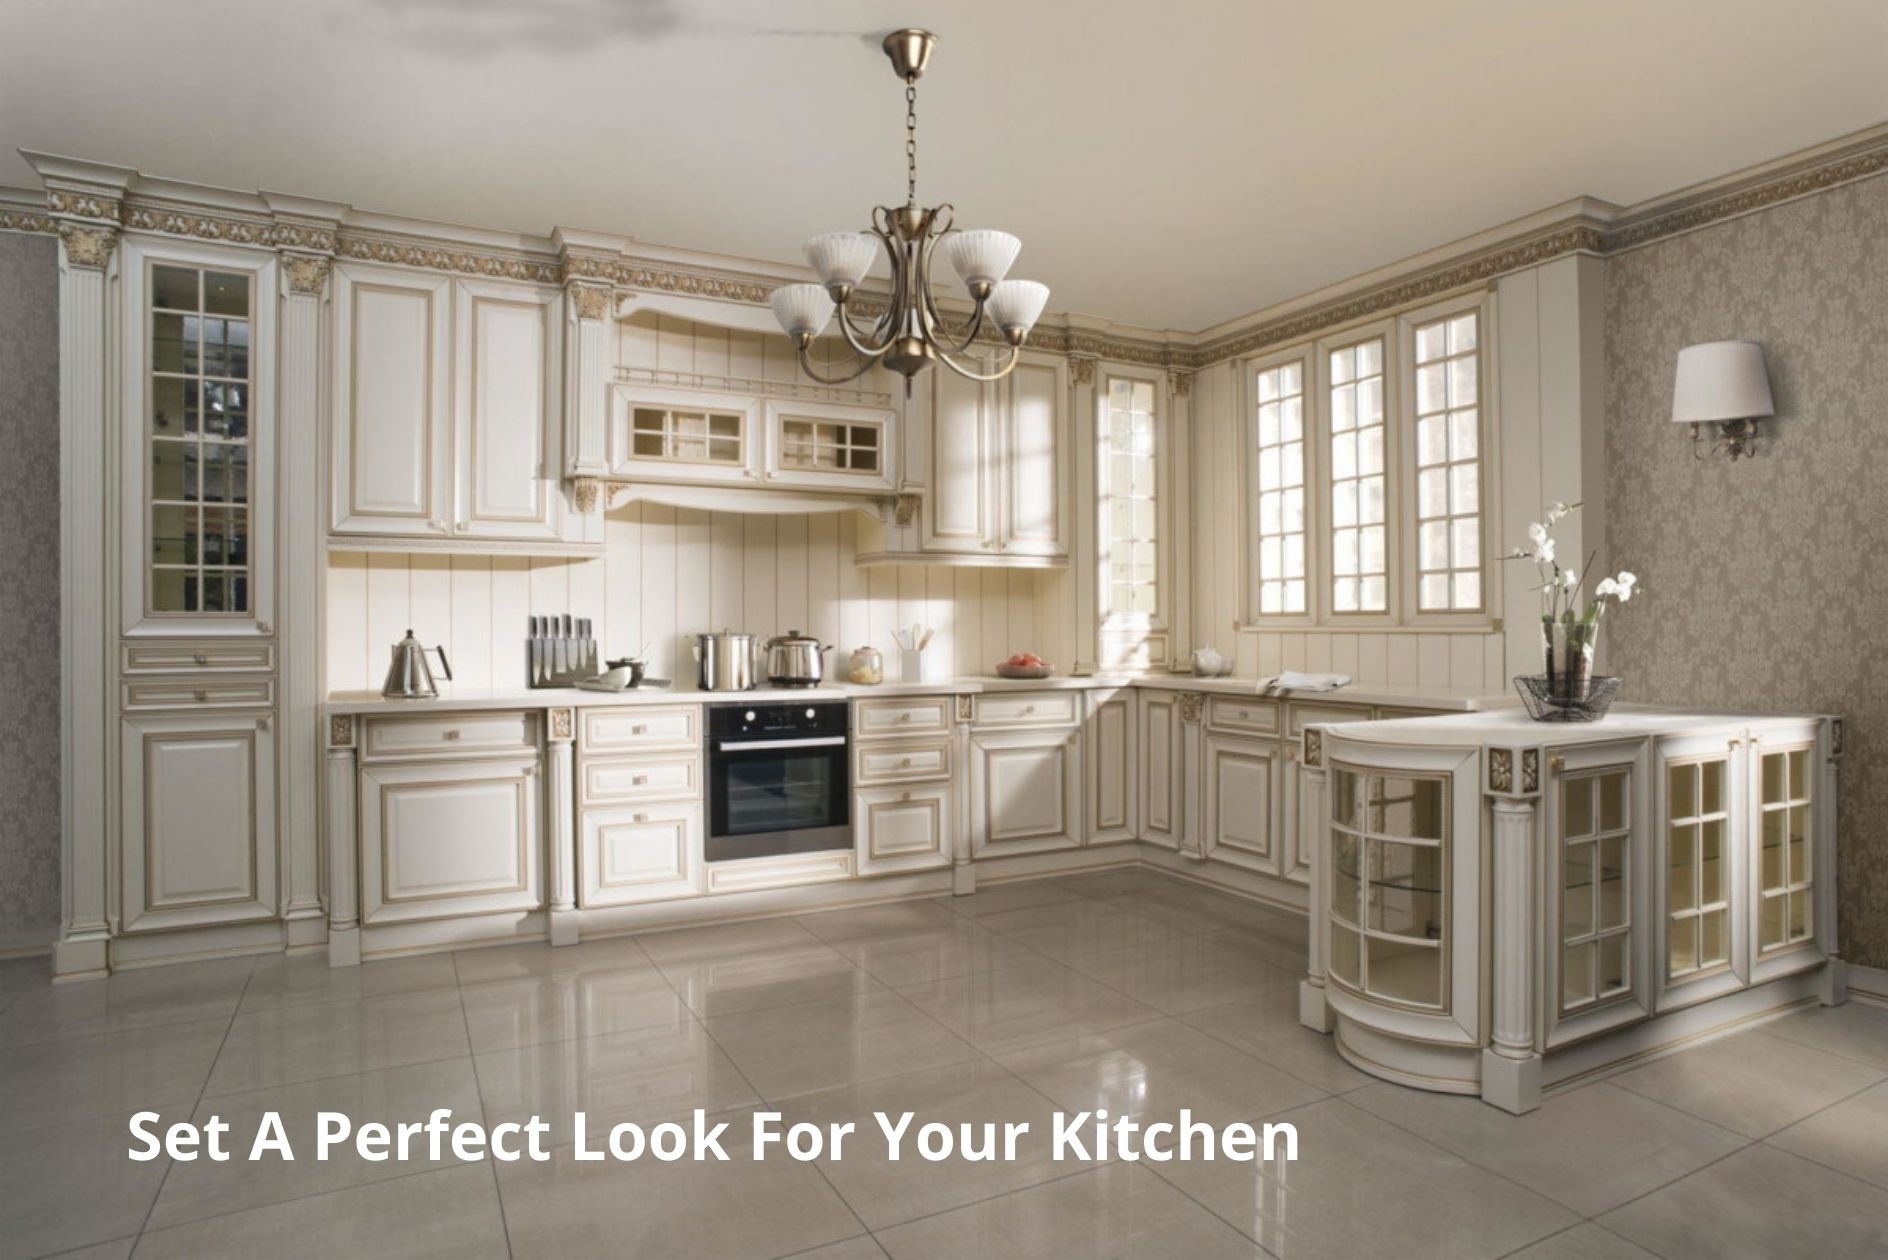 Set A Perfect Look For Your Kitchen